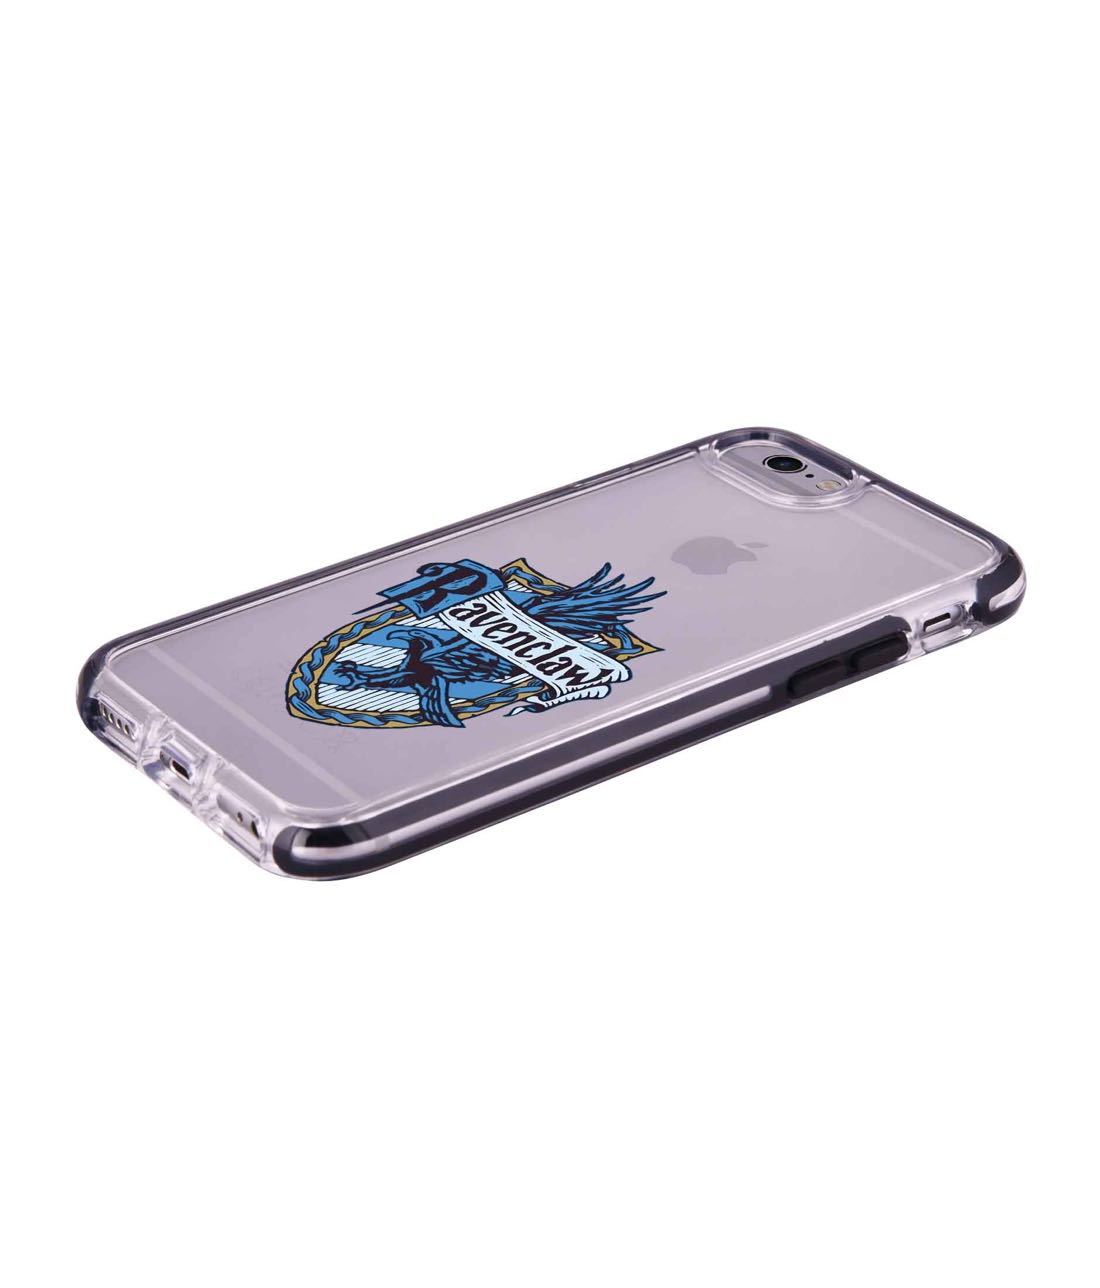 Crest Ravenclaw - Extreme Phone Case for iPhone 6 Plus